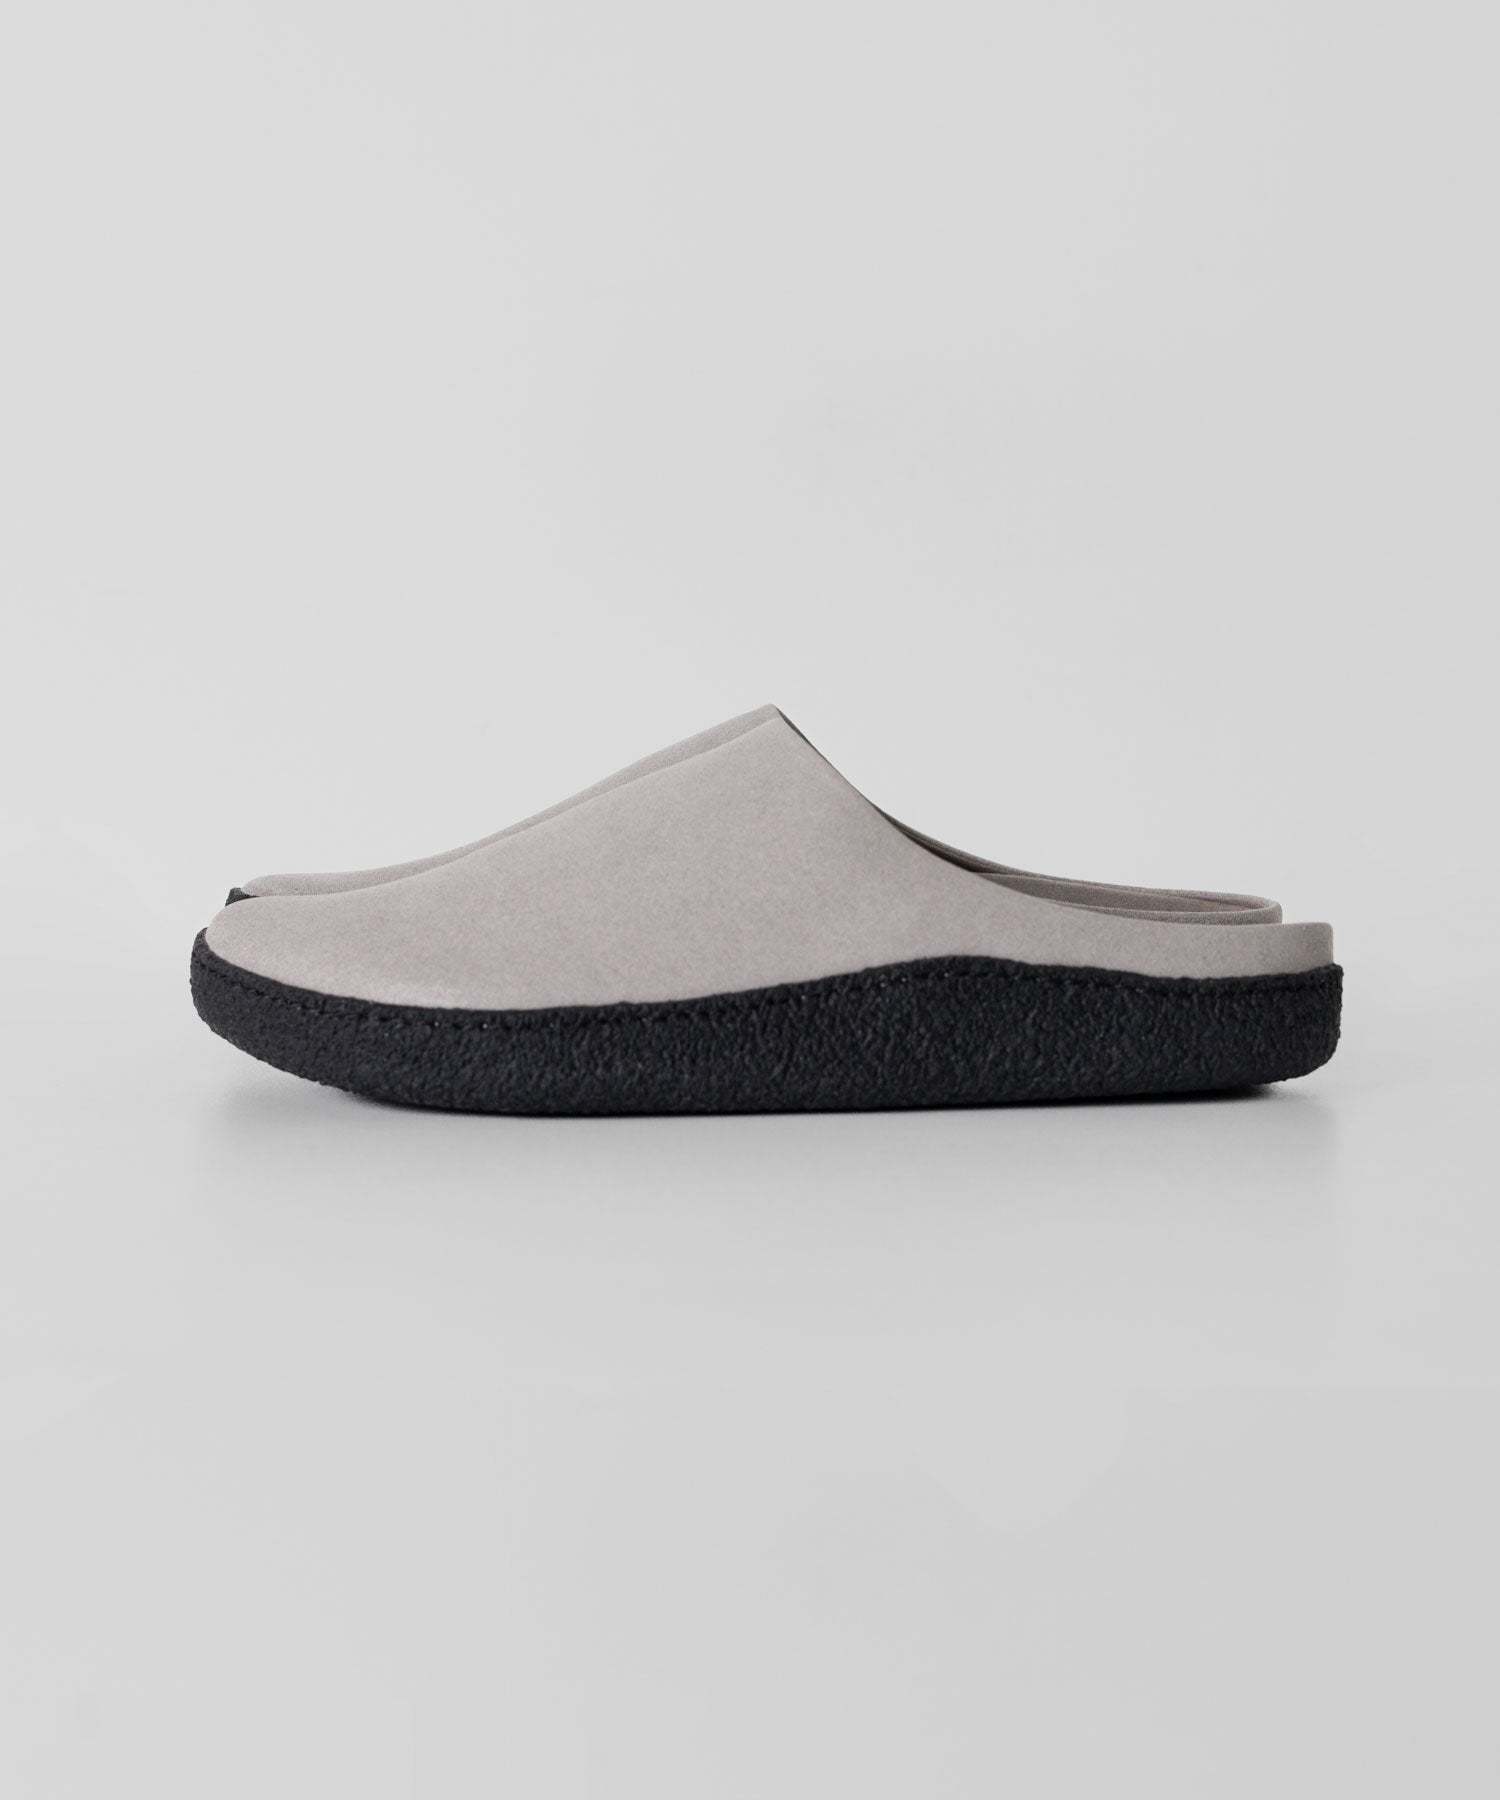 【ATTACHMENT】ATTACHMENT アタッチメントのSYNTHETIC SUEDE LEATHER MULE - L.GRAY 公式通販サイトsession福岡セレクトショップ